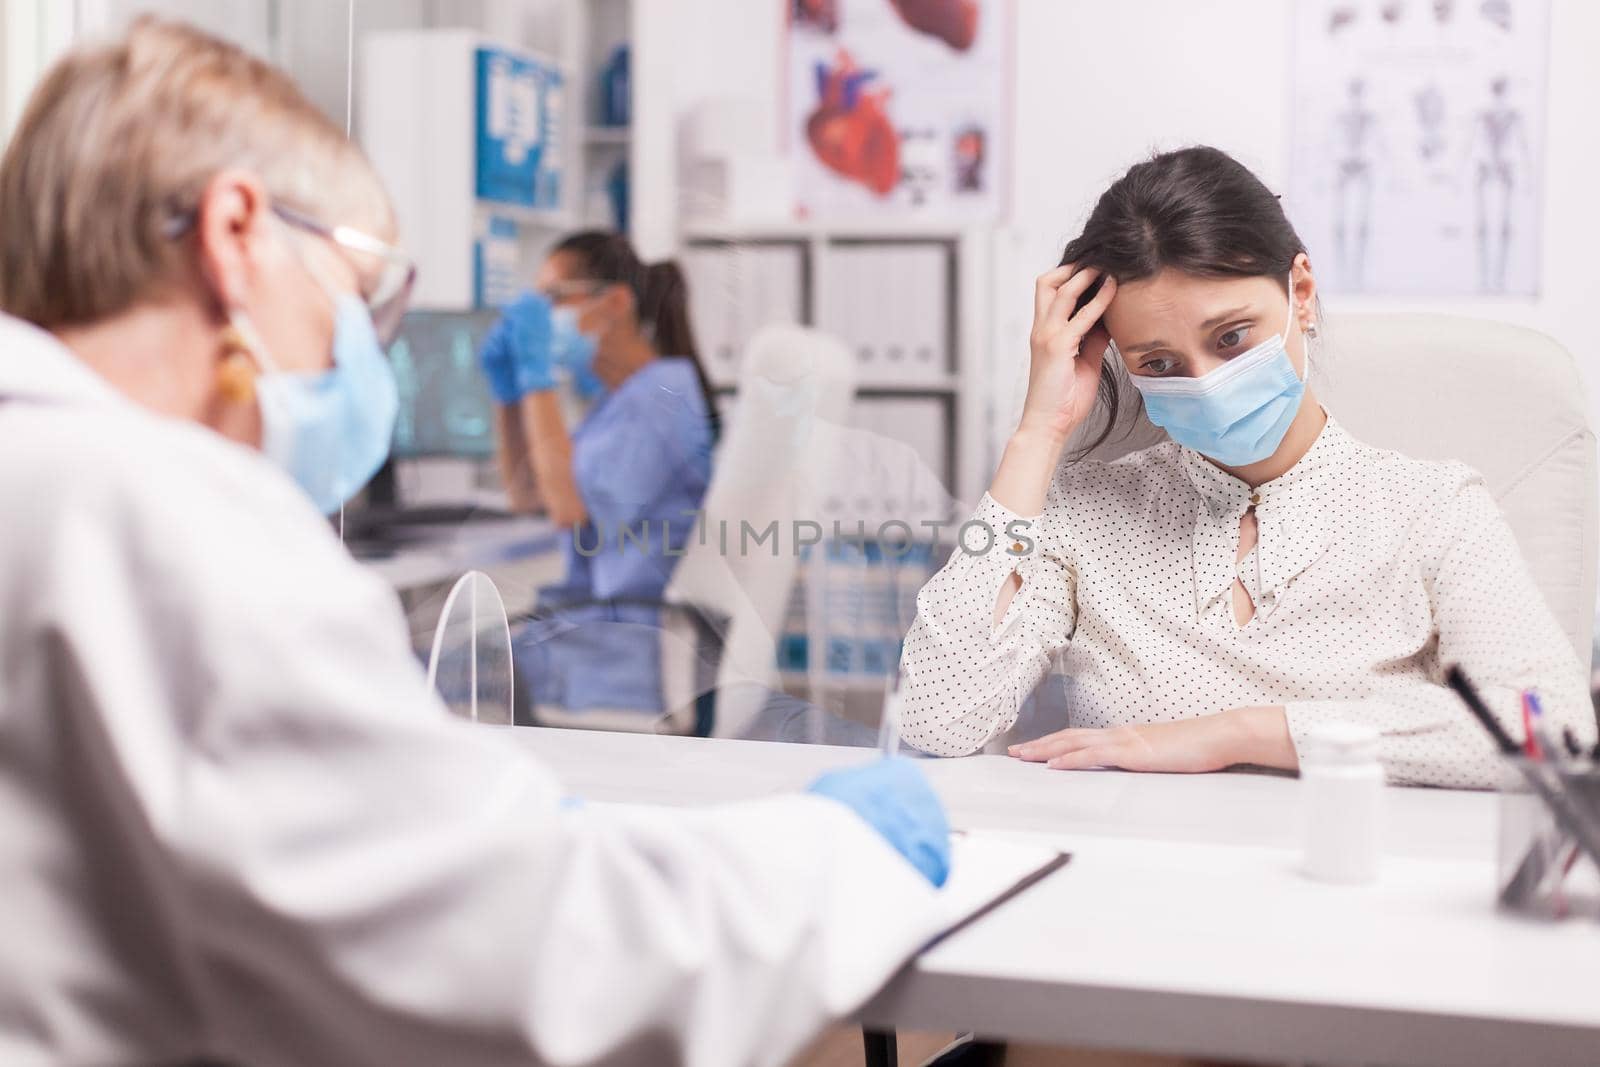 Young woman with protection mask against covid-19 crying during examination with doctor in hospital room.